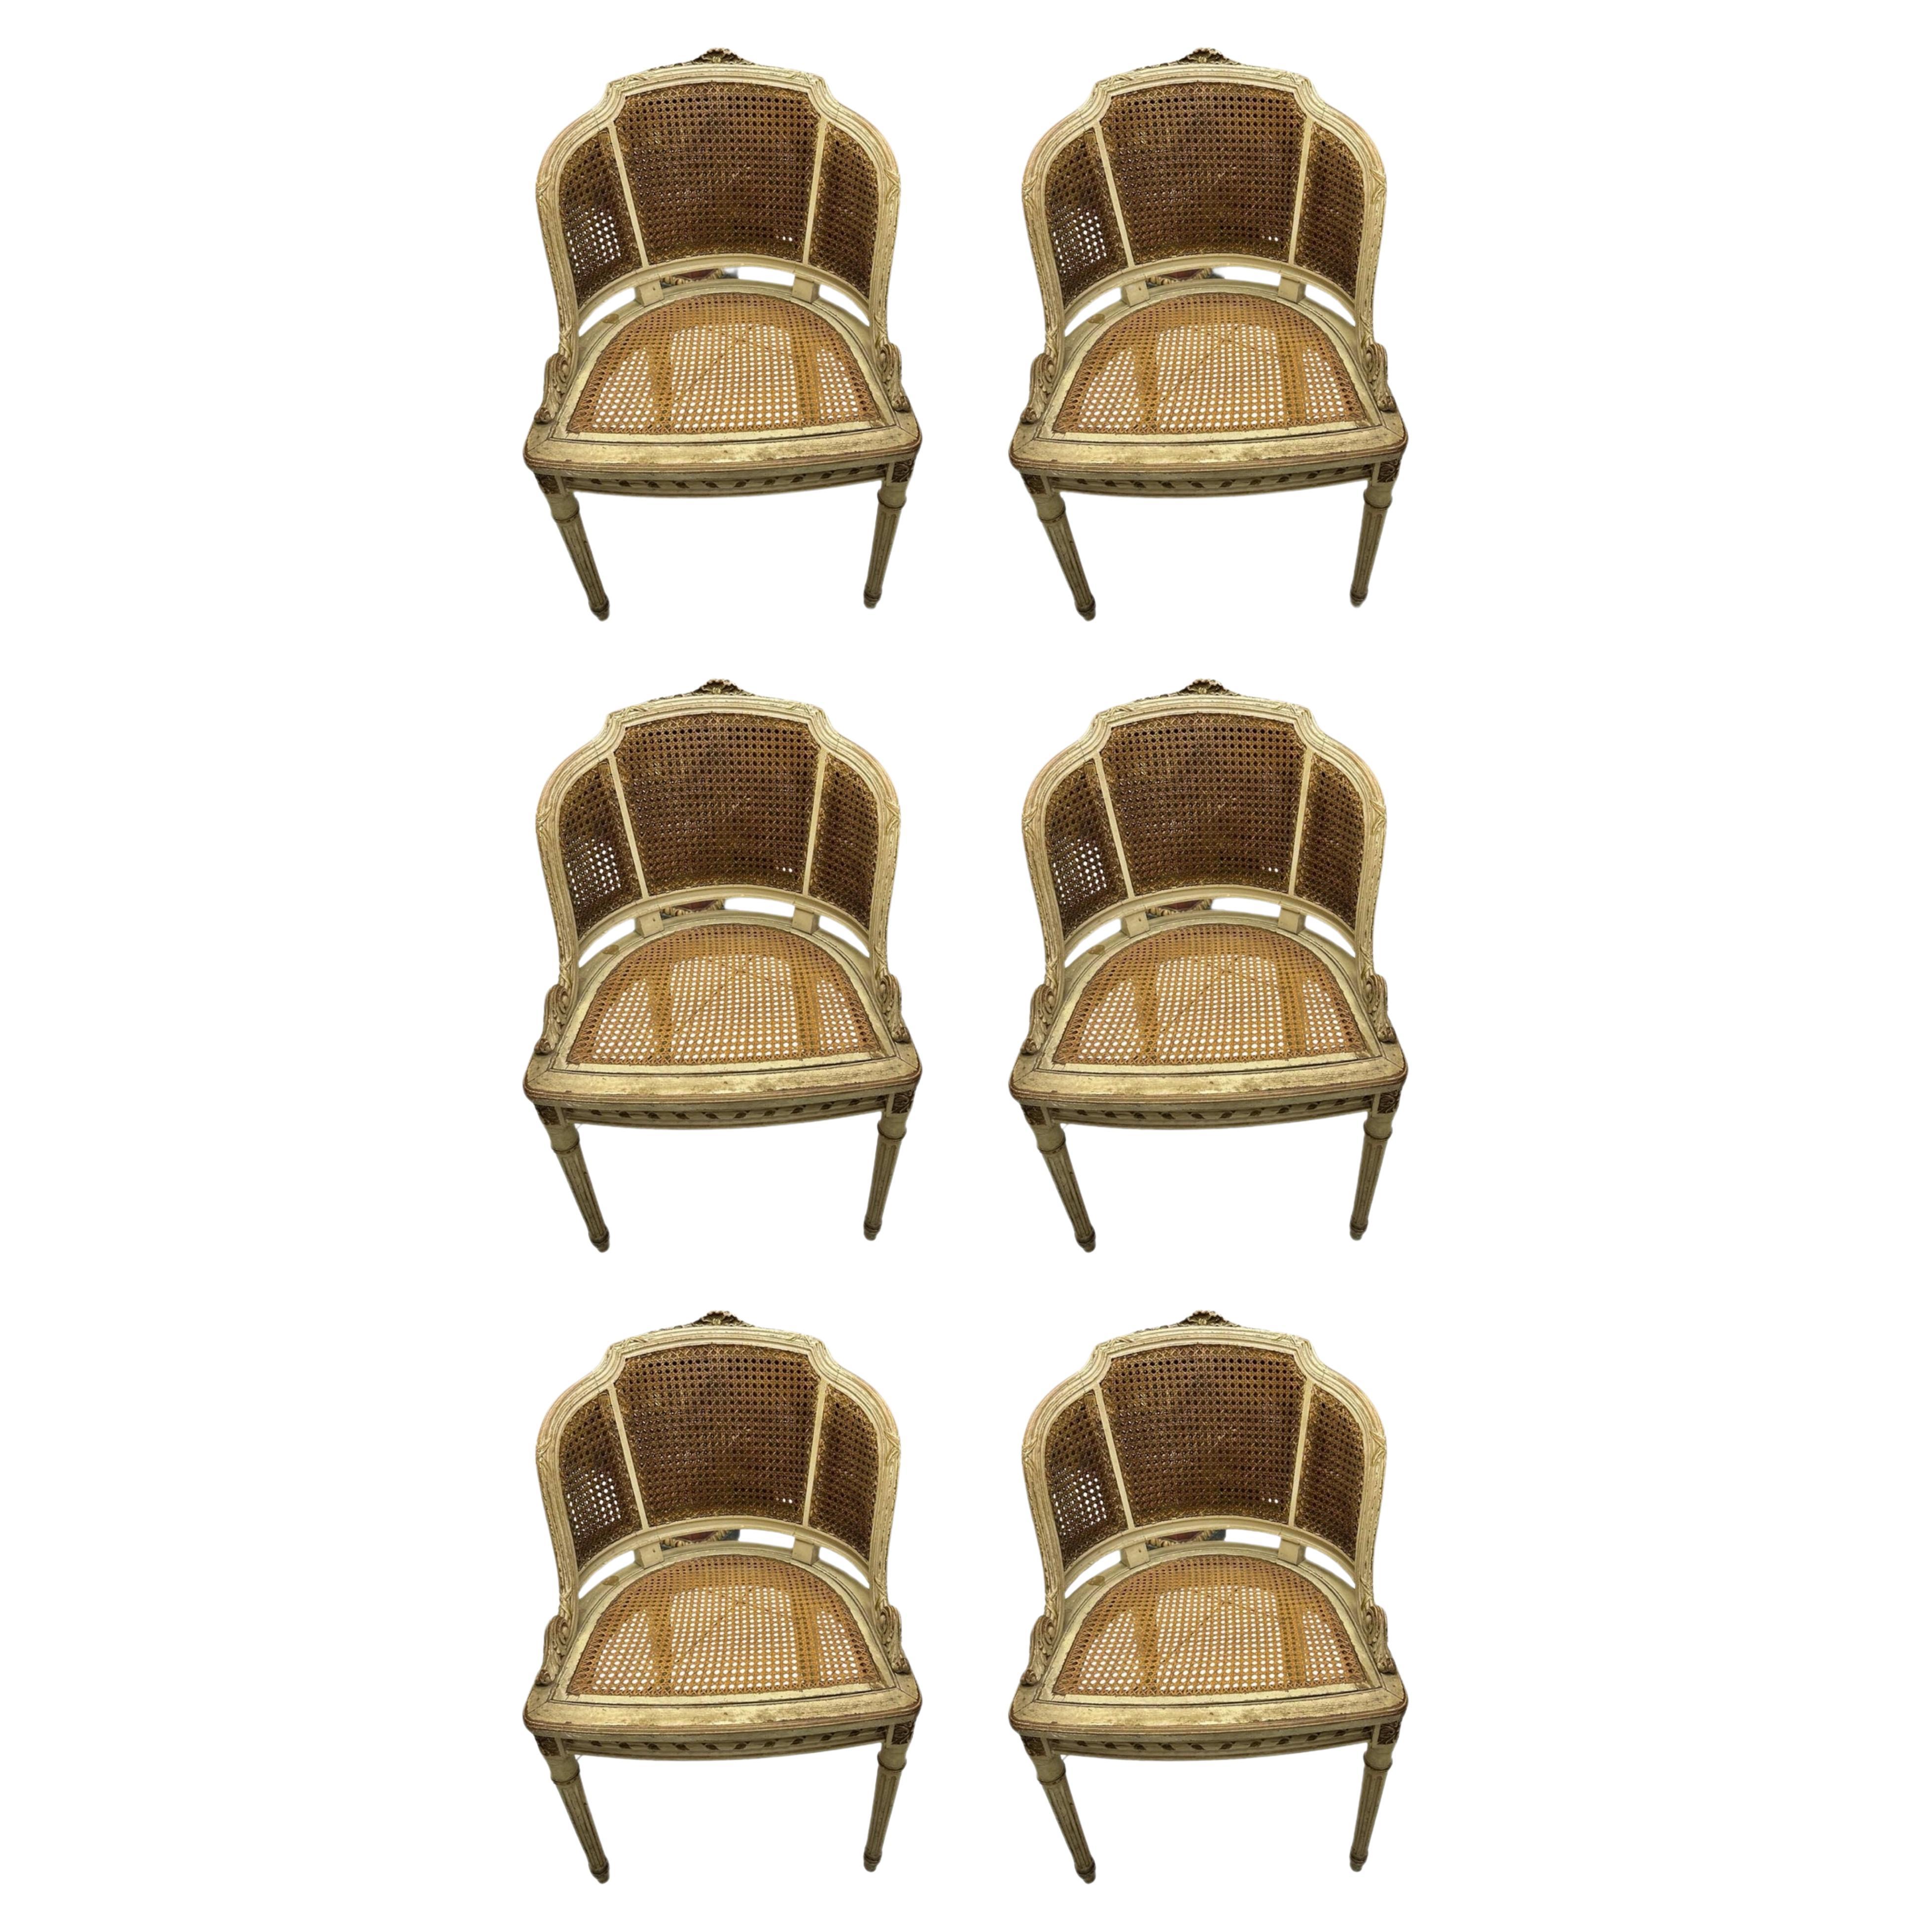 Beautiful and Unique 6 (Six) 19th Century Italian Armchairs For Sale